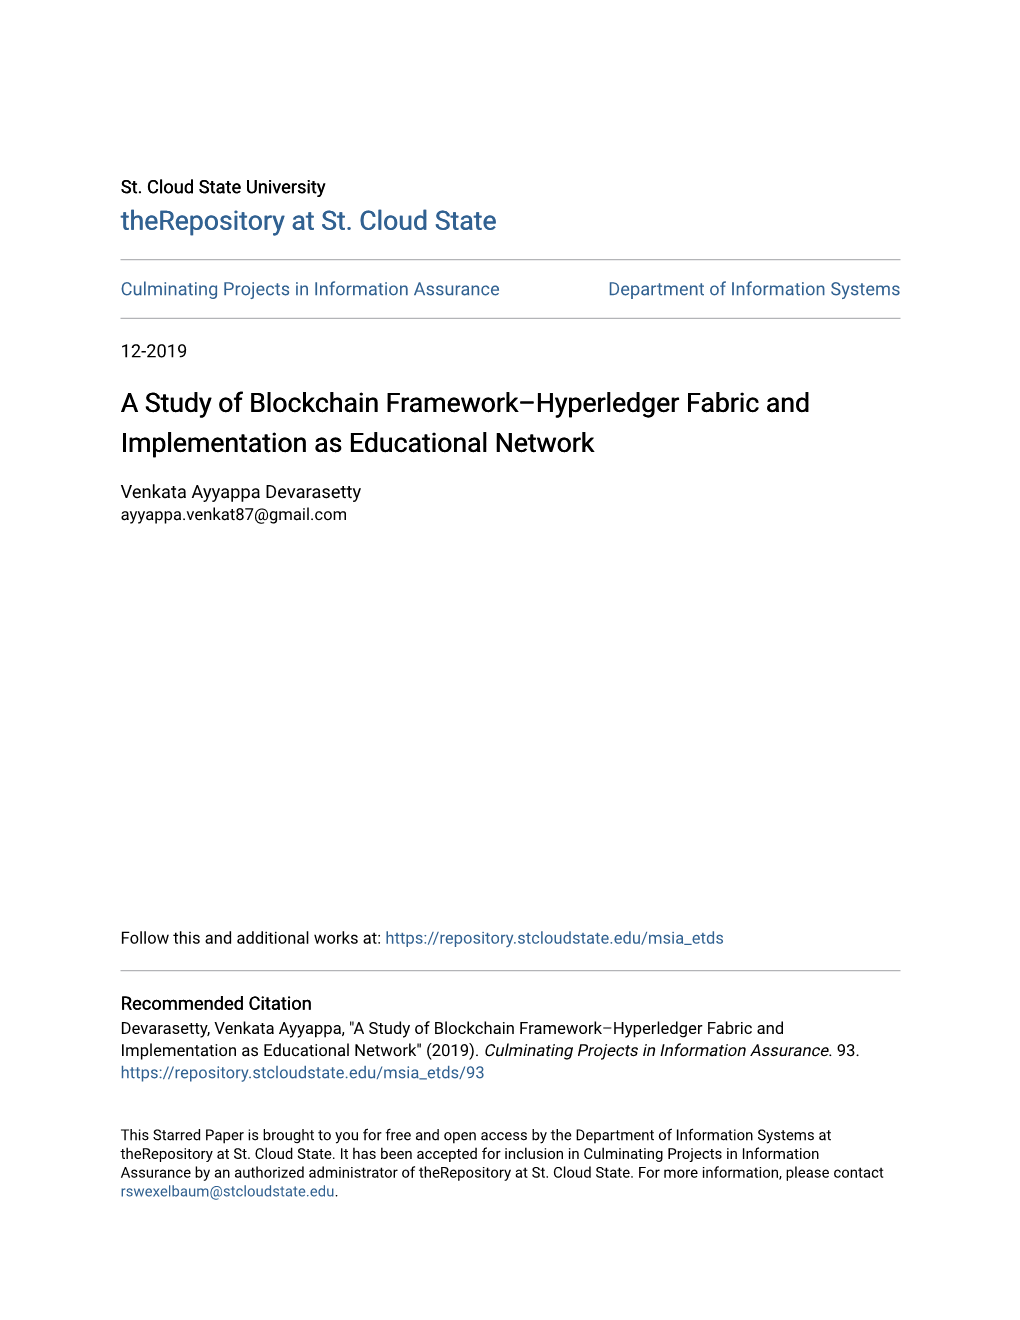 A Study of Blockchain Framework–Hyperledger Fabric and Implementation As Educational Network